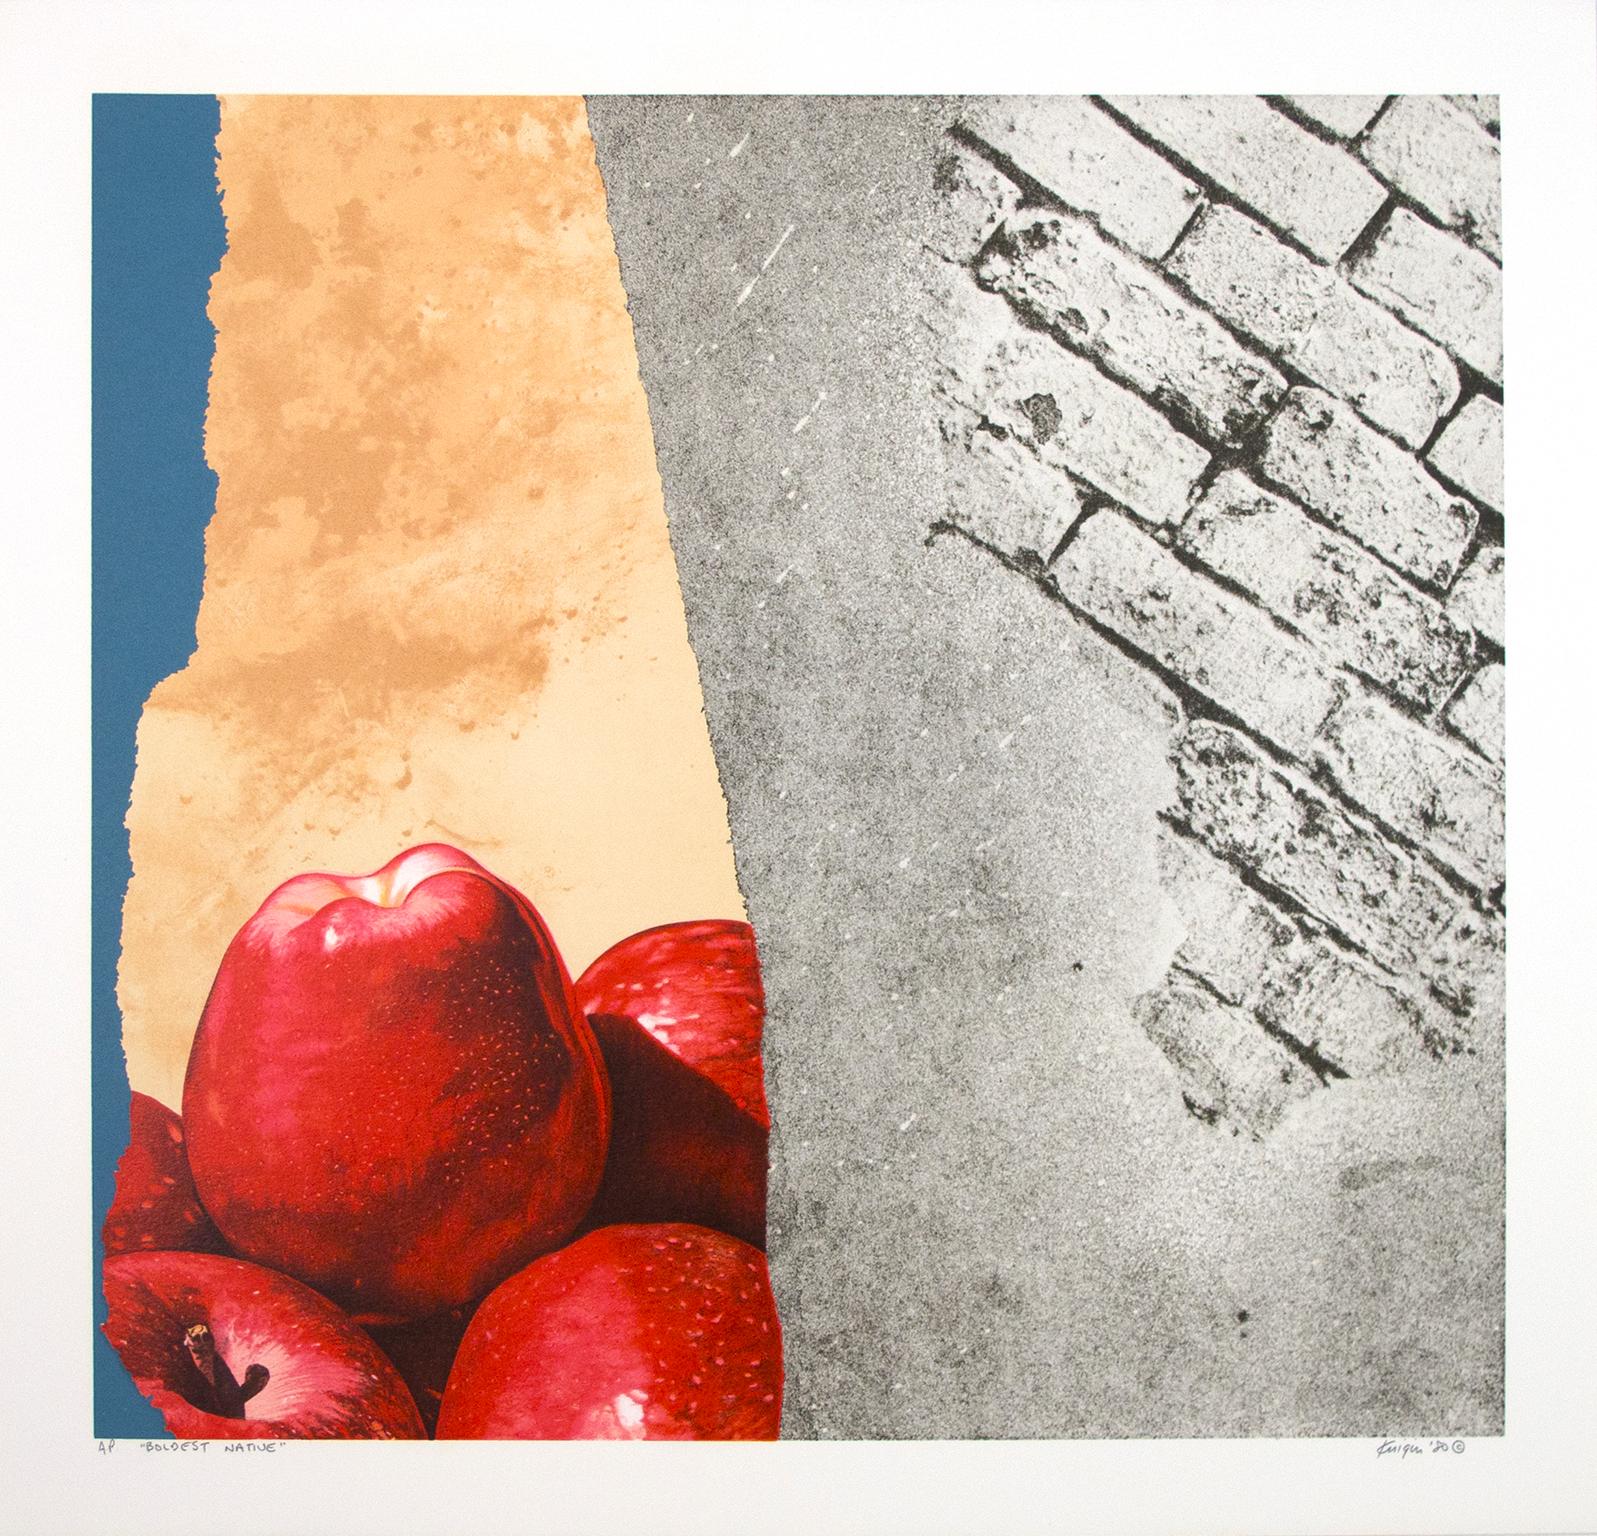 "Boldest Native" is an original color lithograph by Michael Knigin. This piece features a pile of apples with abstract textures. The artist signed the piece lower right and titled it lower left. This piece is an artist's proof. 

19" x 19 1/2"